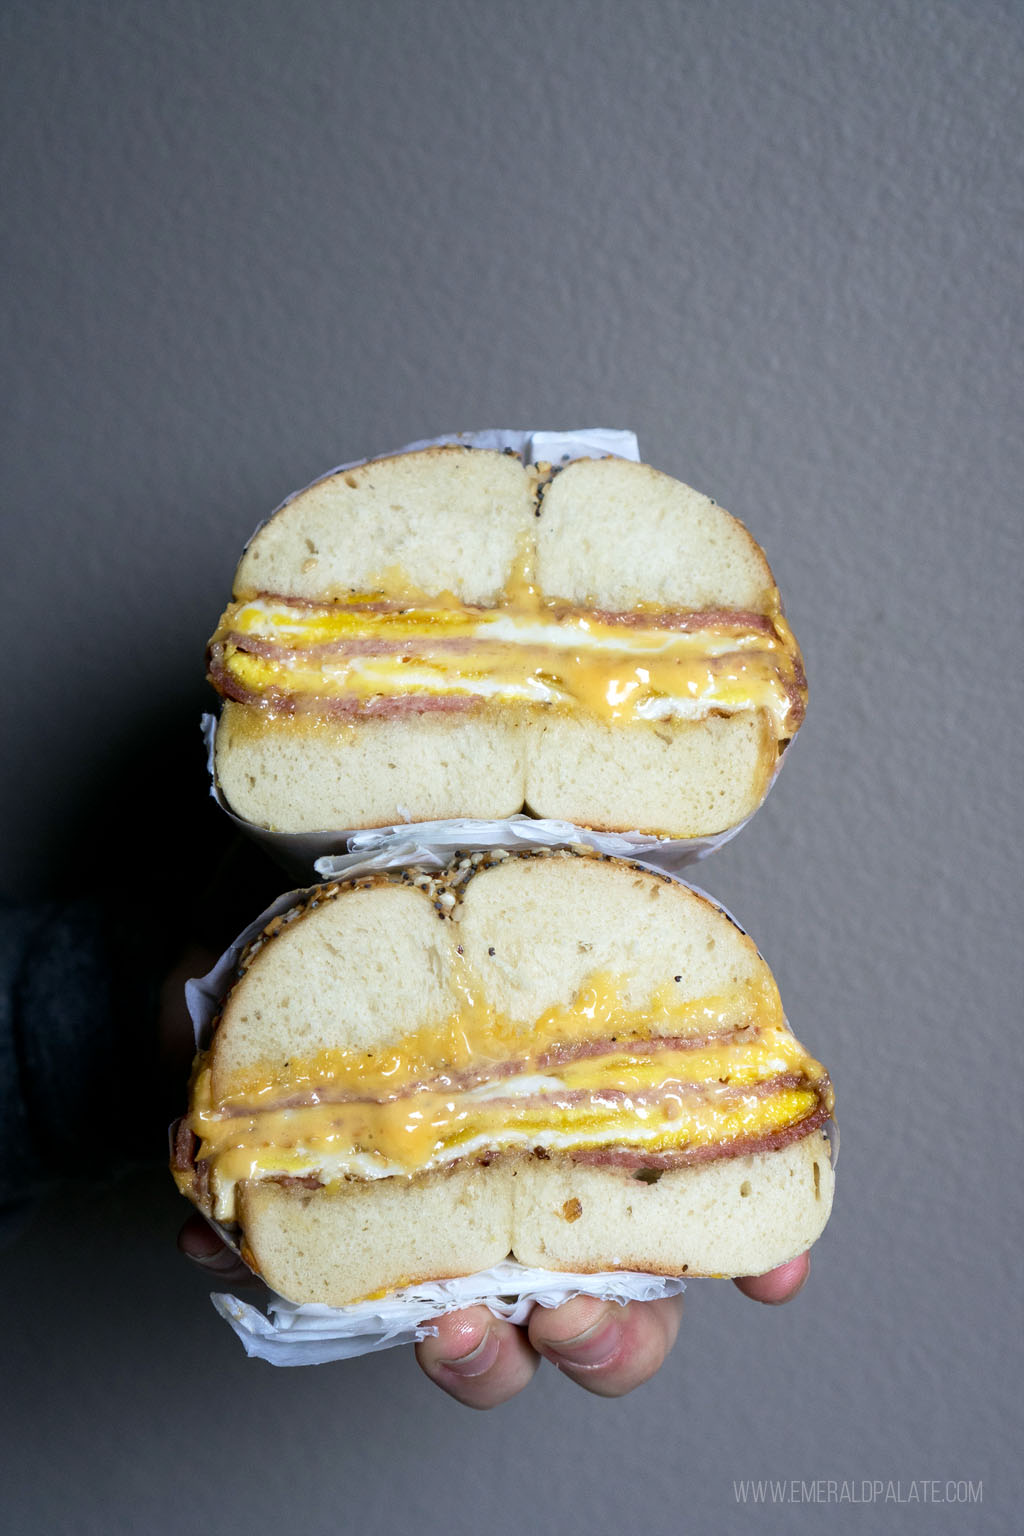 two halves of a bagel taylor ham, egg, and cheese sandwich stacked on top of each other